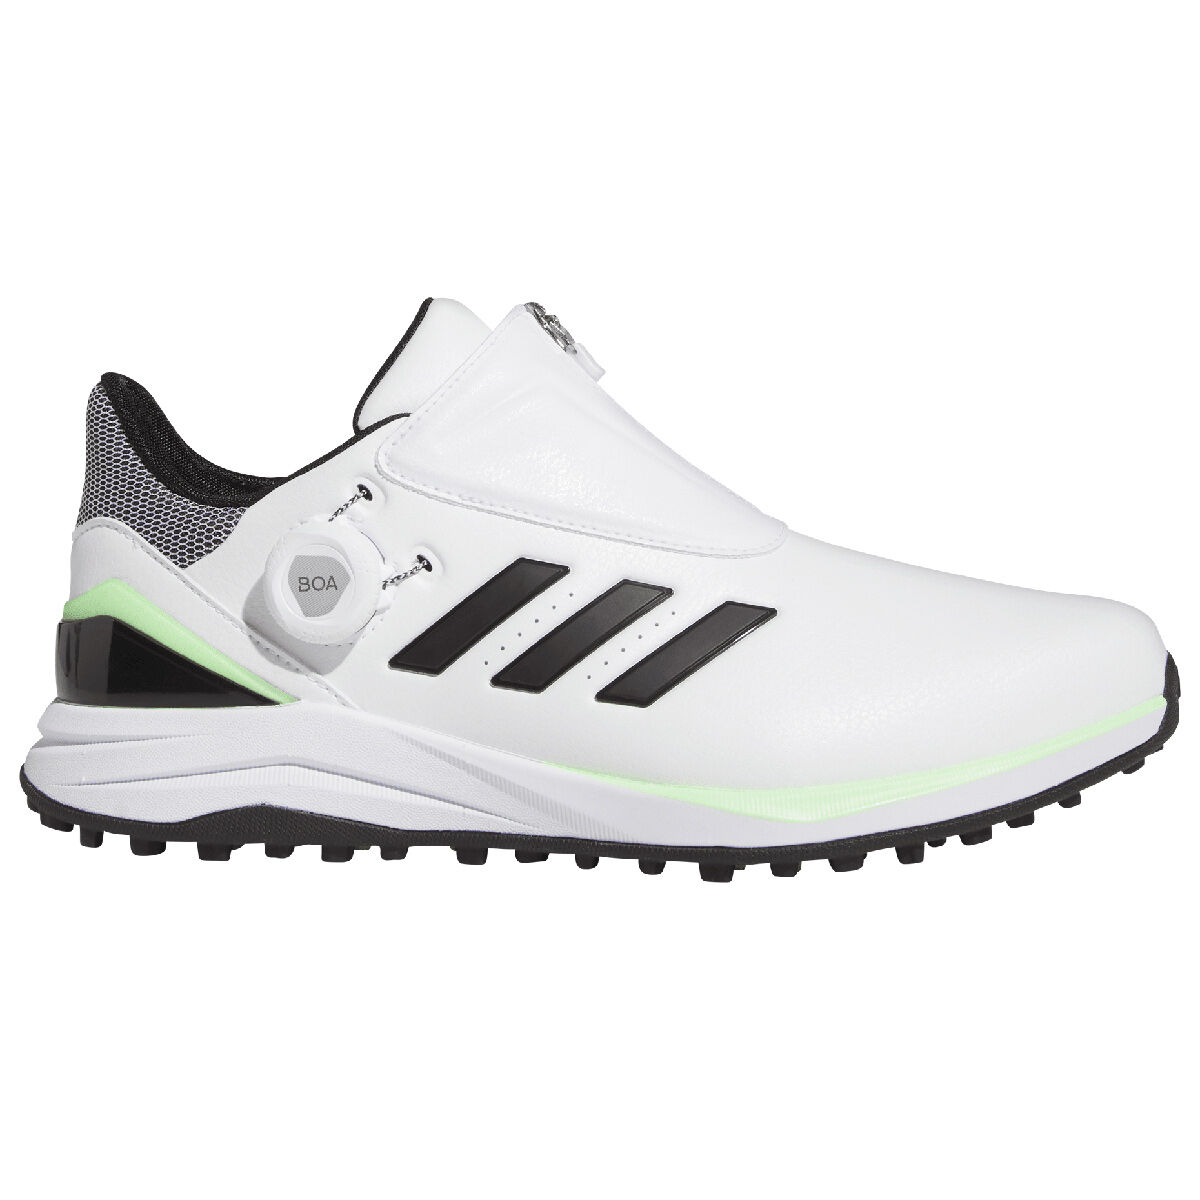 adidas SOLARmotion BOA Spikeless Waterproof Golf Shoes, Mens, White/core black/green spark, 11 | American Golf